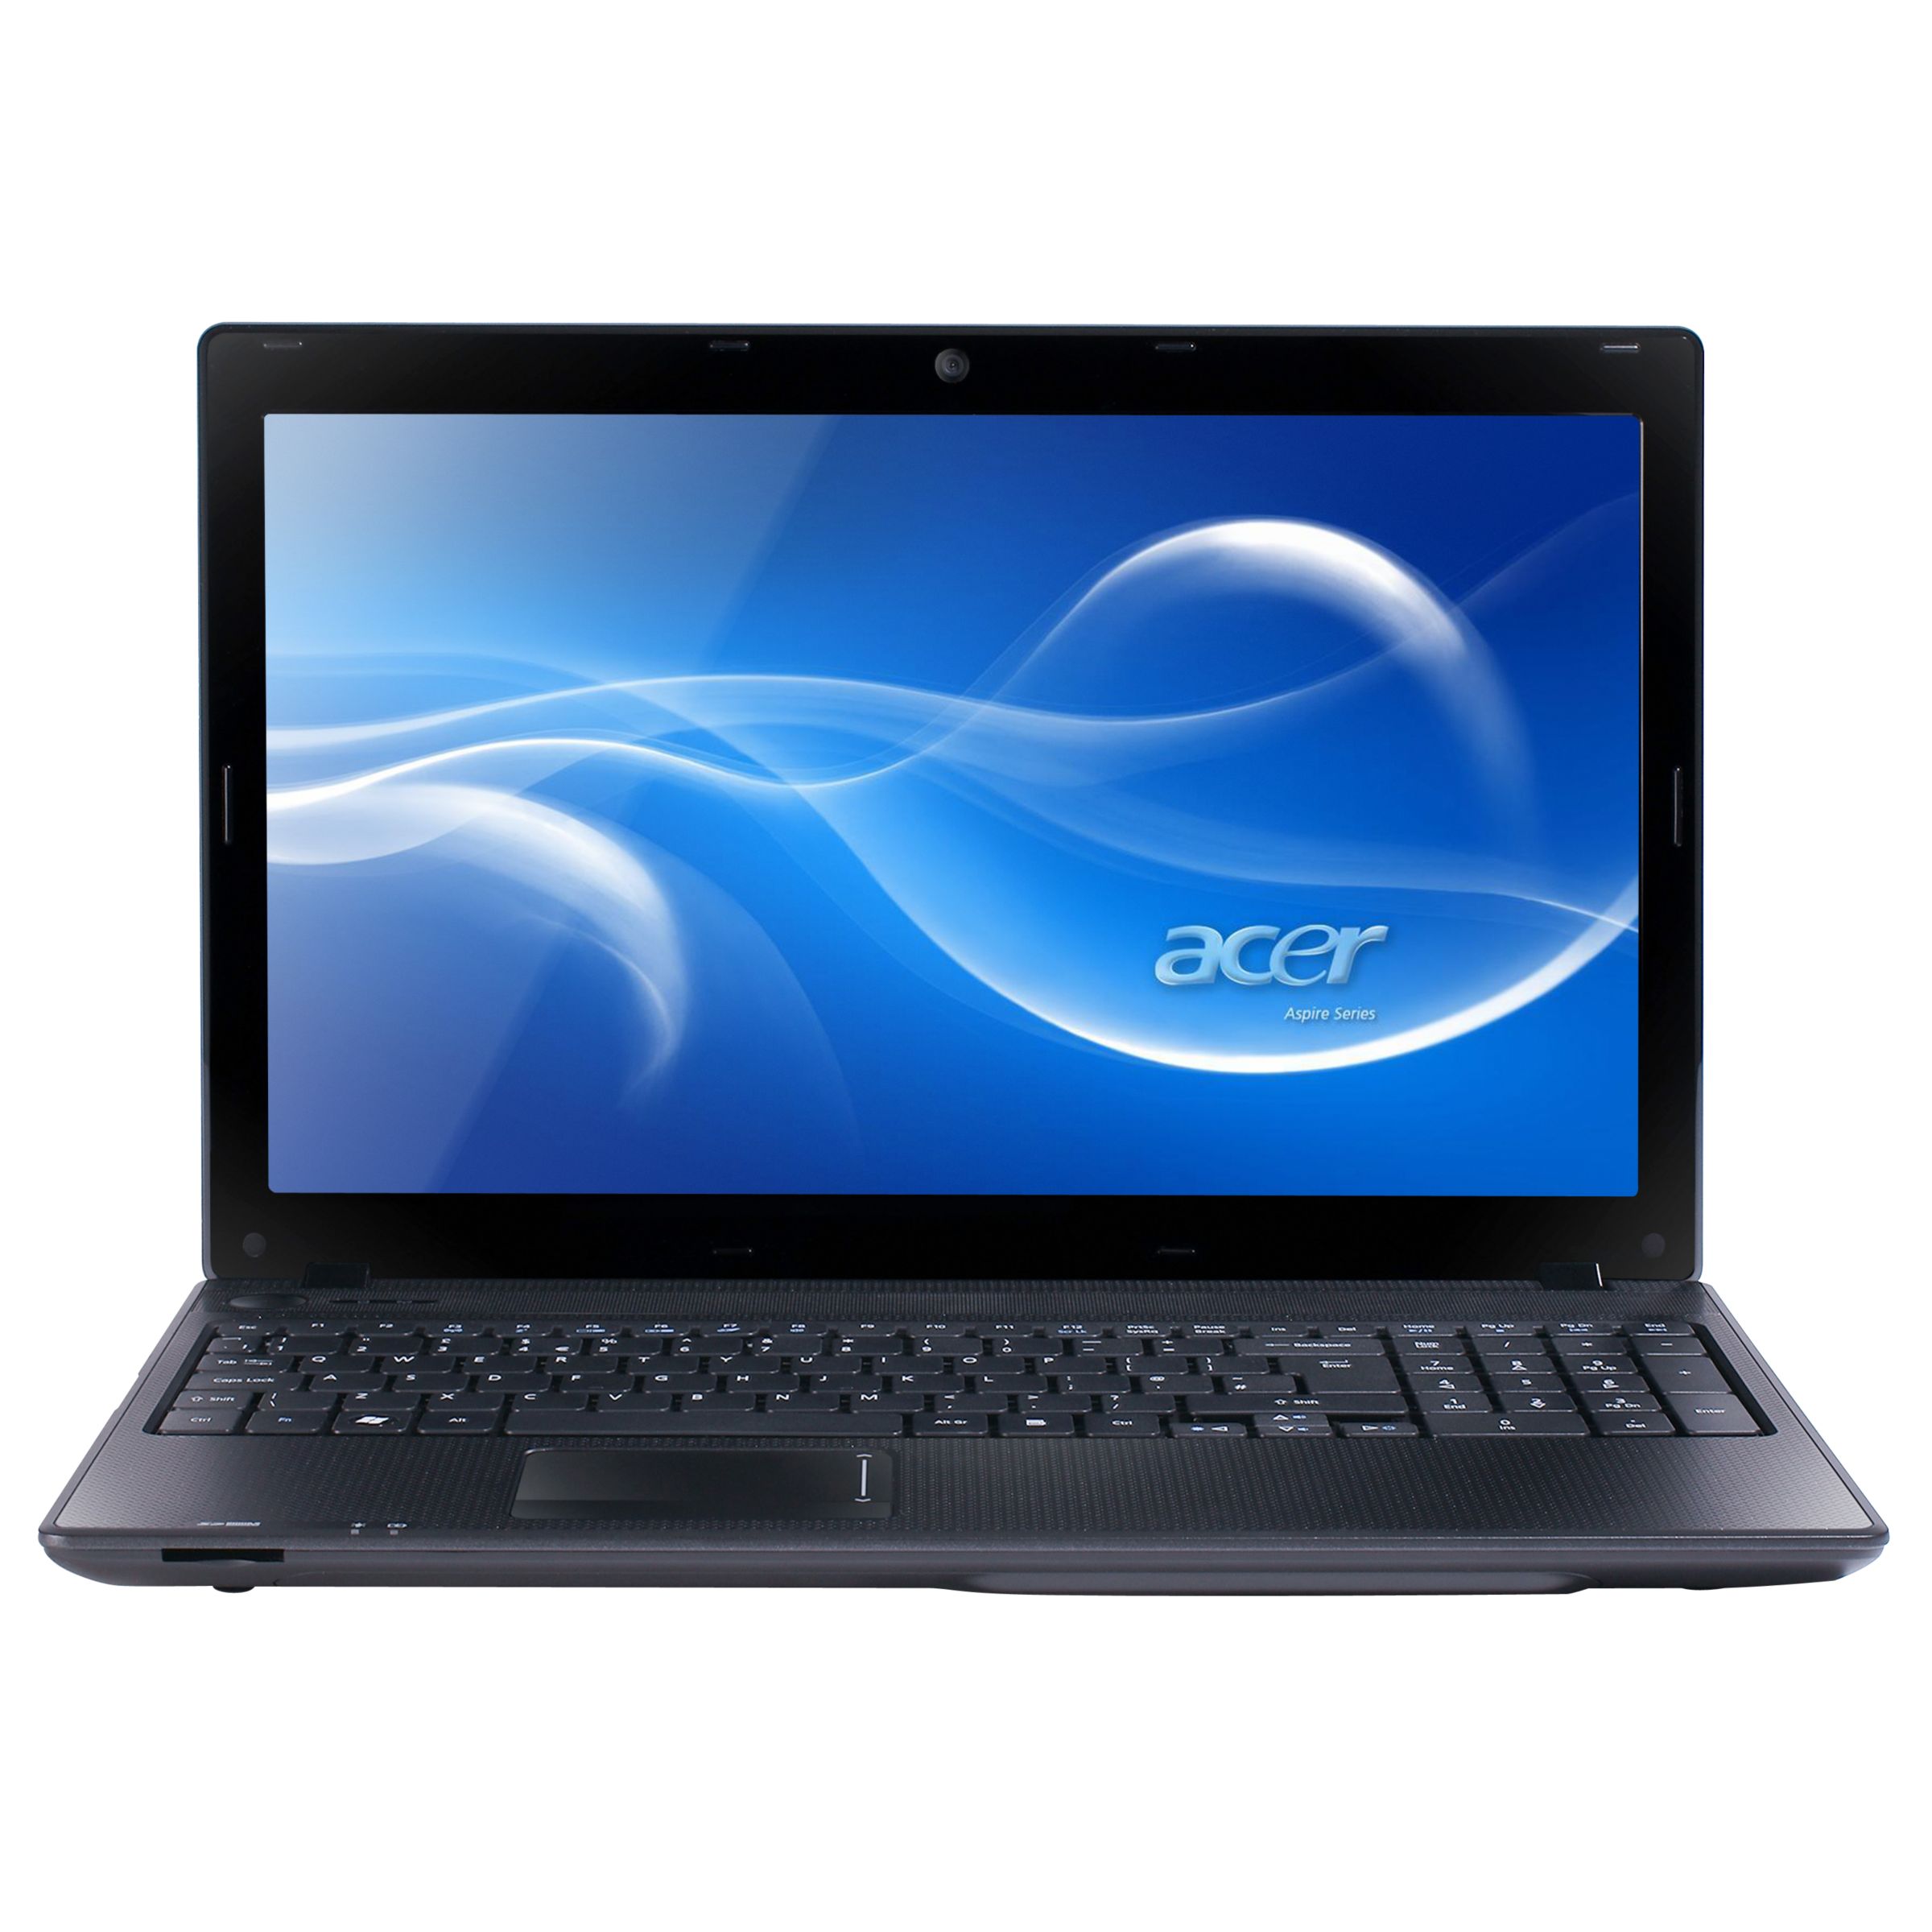 Acer Aspire 5742 Laptop, Intel Core i3, 320GB, 2.4GHz, 4GB RAM with 15.6 Inch Display at John Lewis